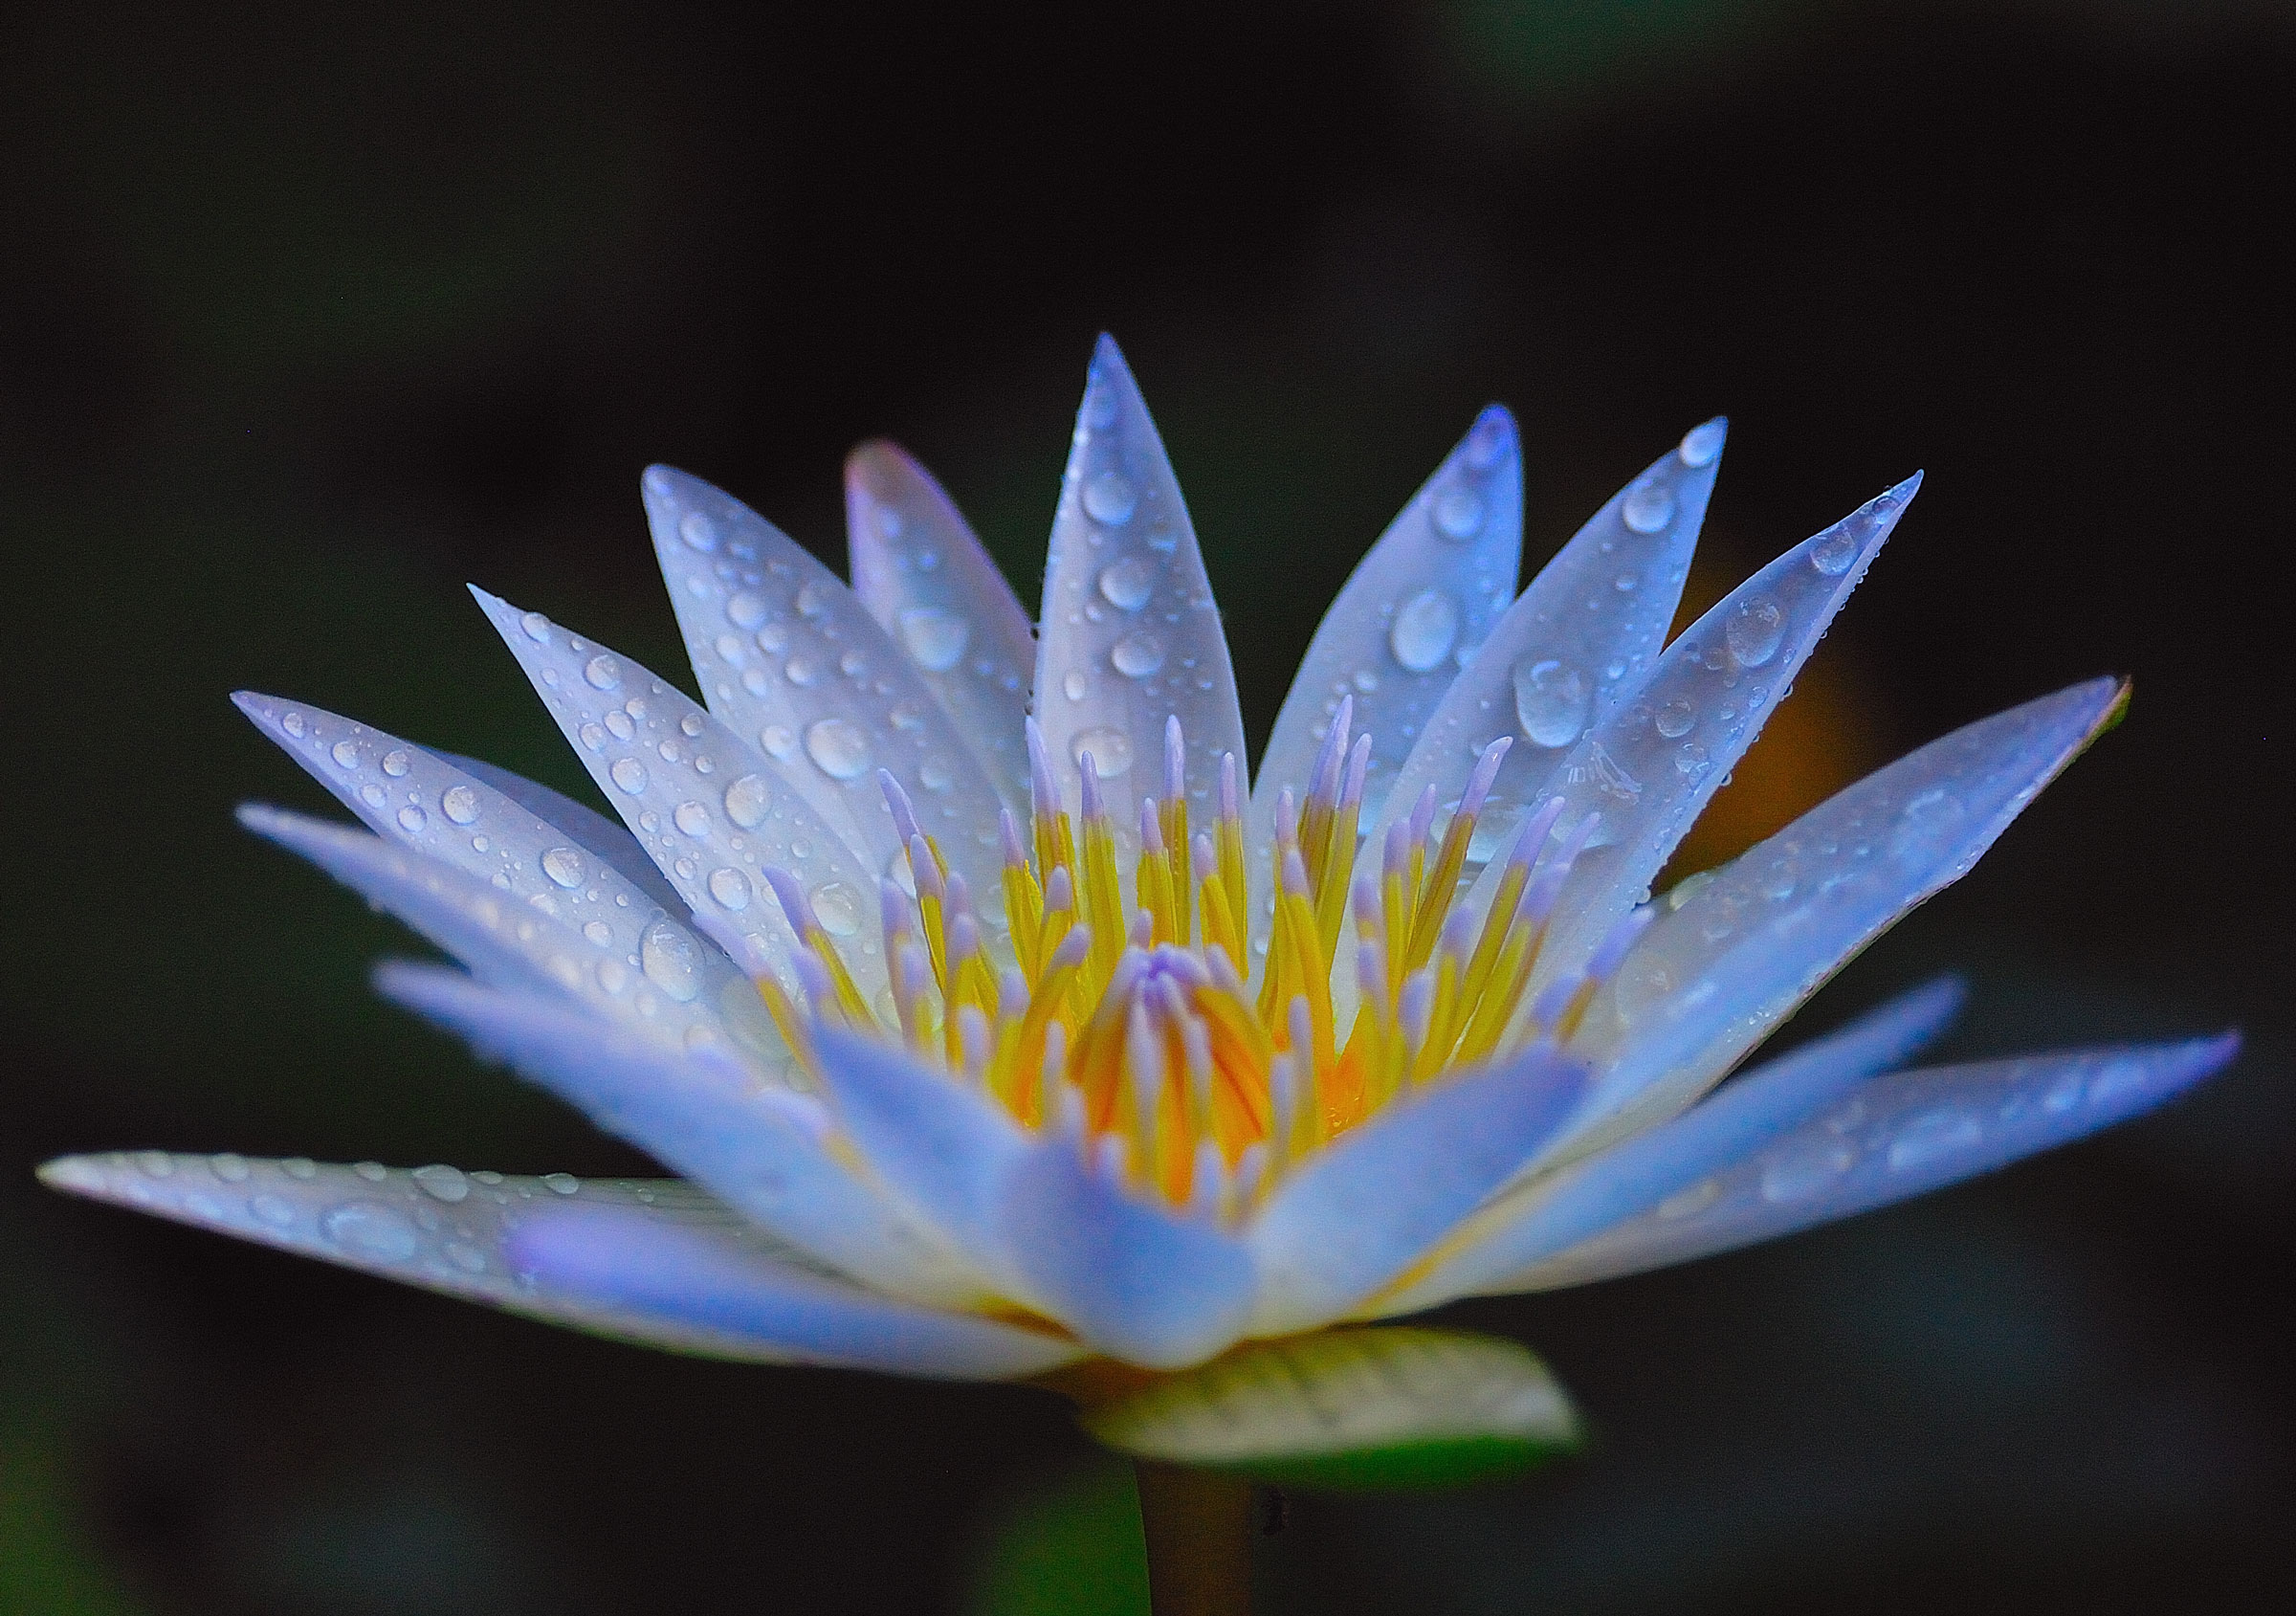 Blue Lotus Absolute (Nymphaea caerulea) from